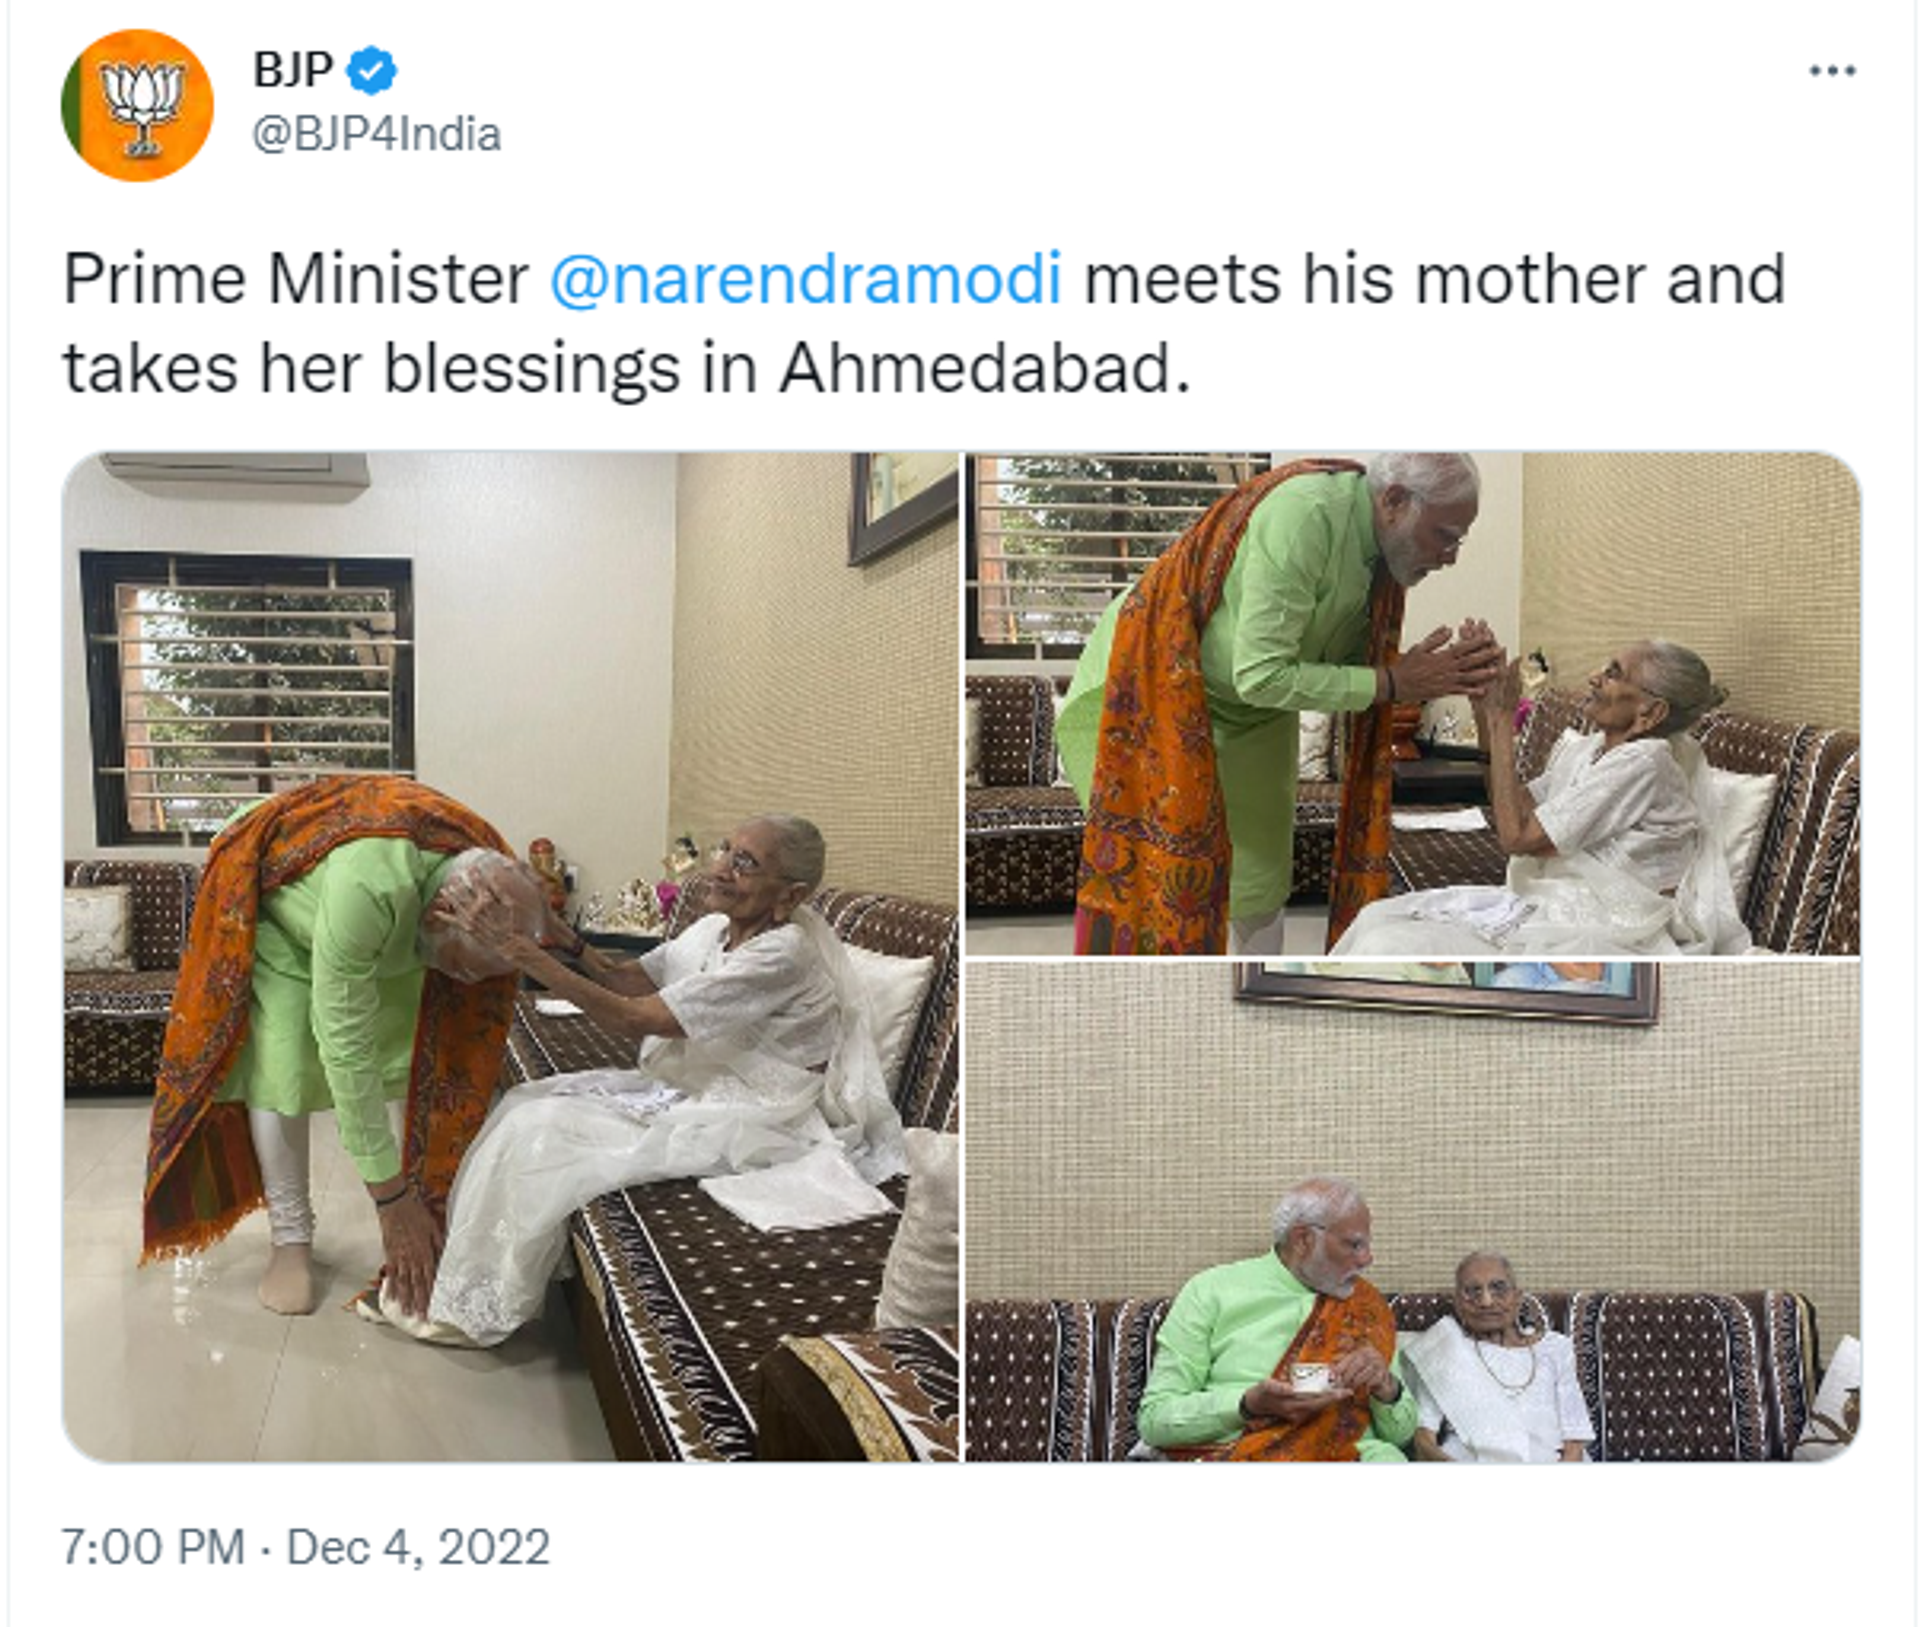 Prime Minister Narendra Modi Took Blessings From His Mother on the eve of Gujarat Elections - Sputnik International, 1920, 05.12.2022